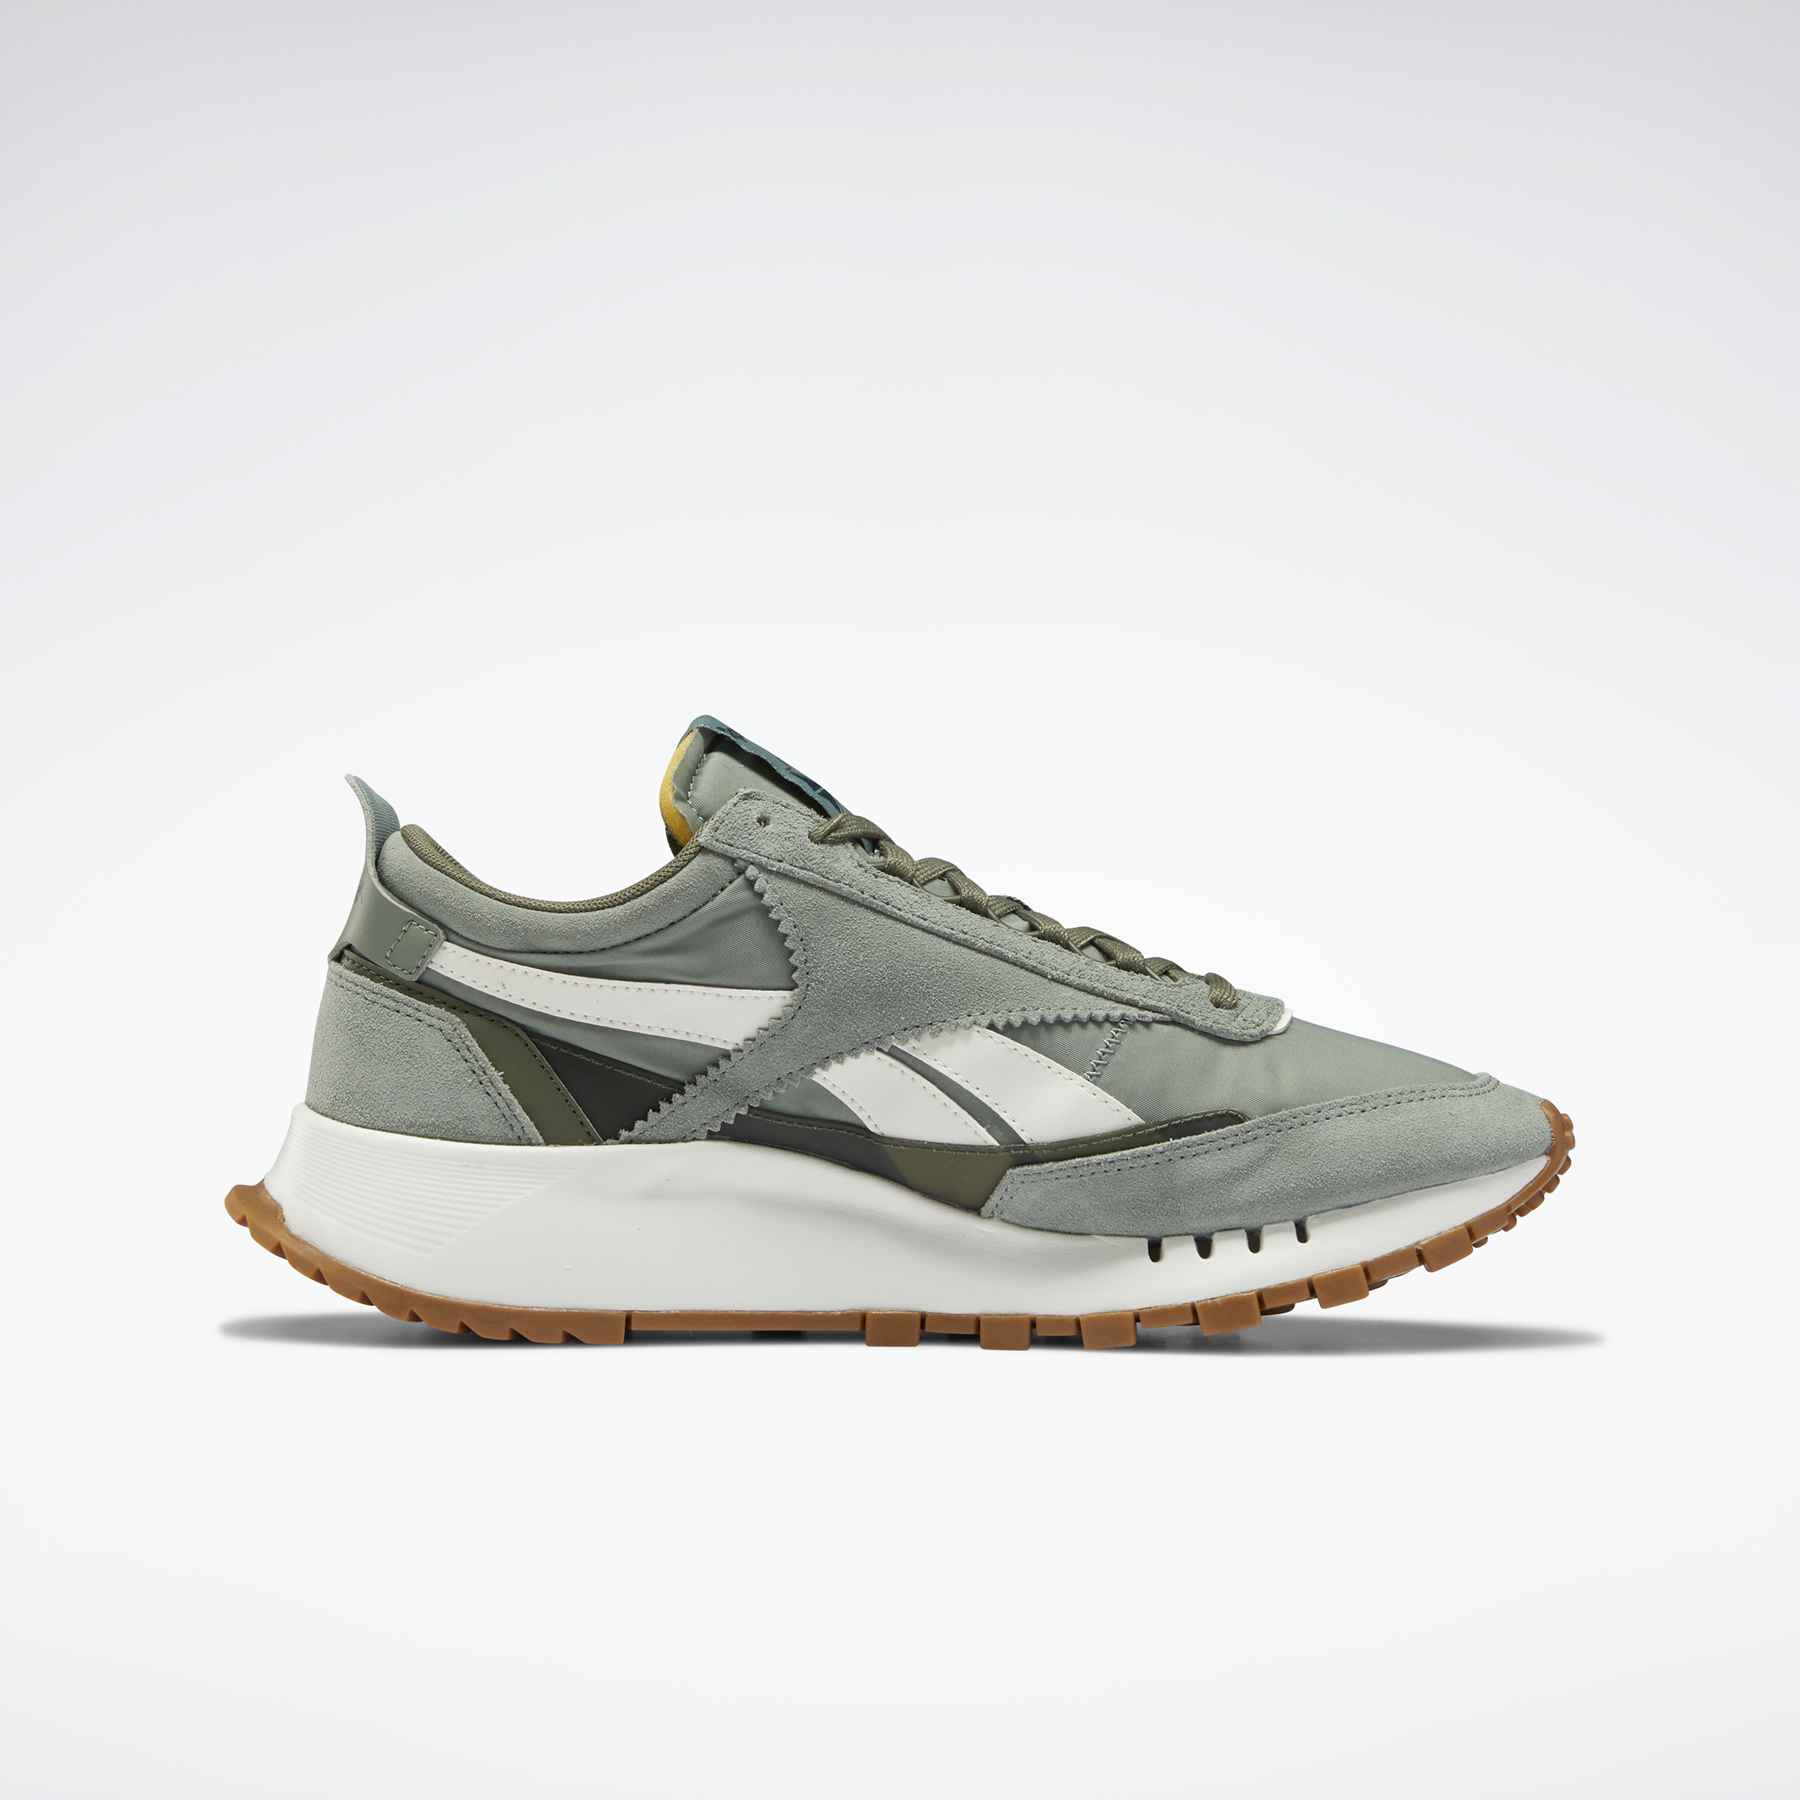 Reebok Classic Leather Legacy Shoes